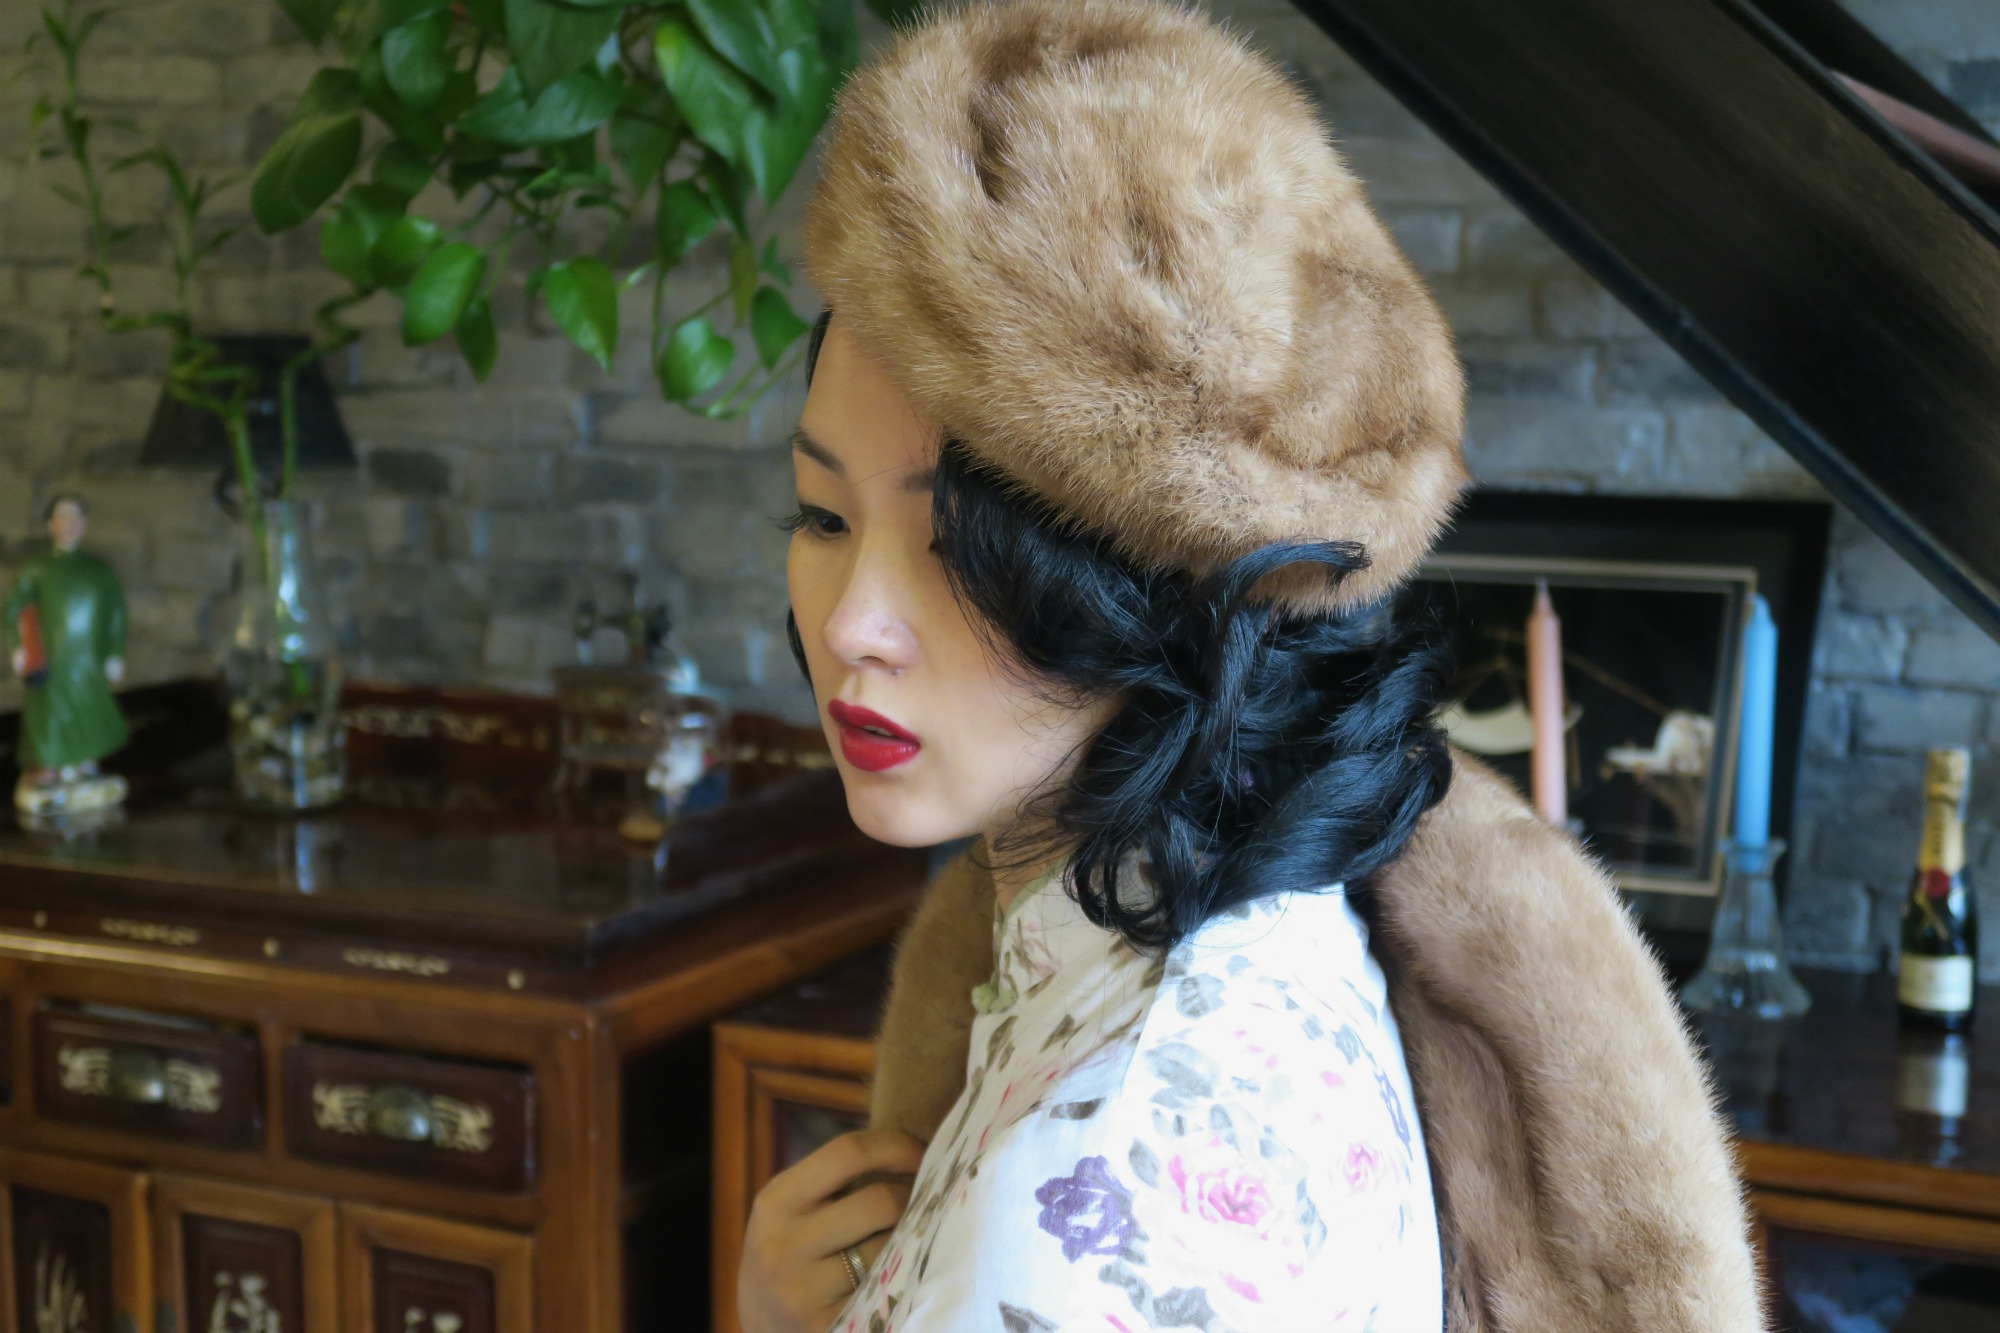 Qipao (cheongsam) with vintage fur jacket and hat